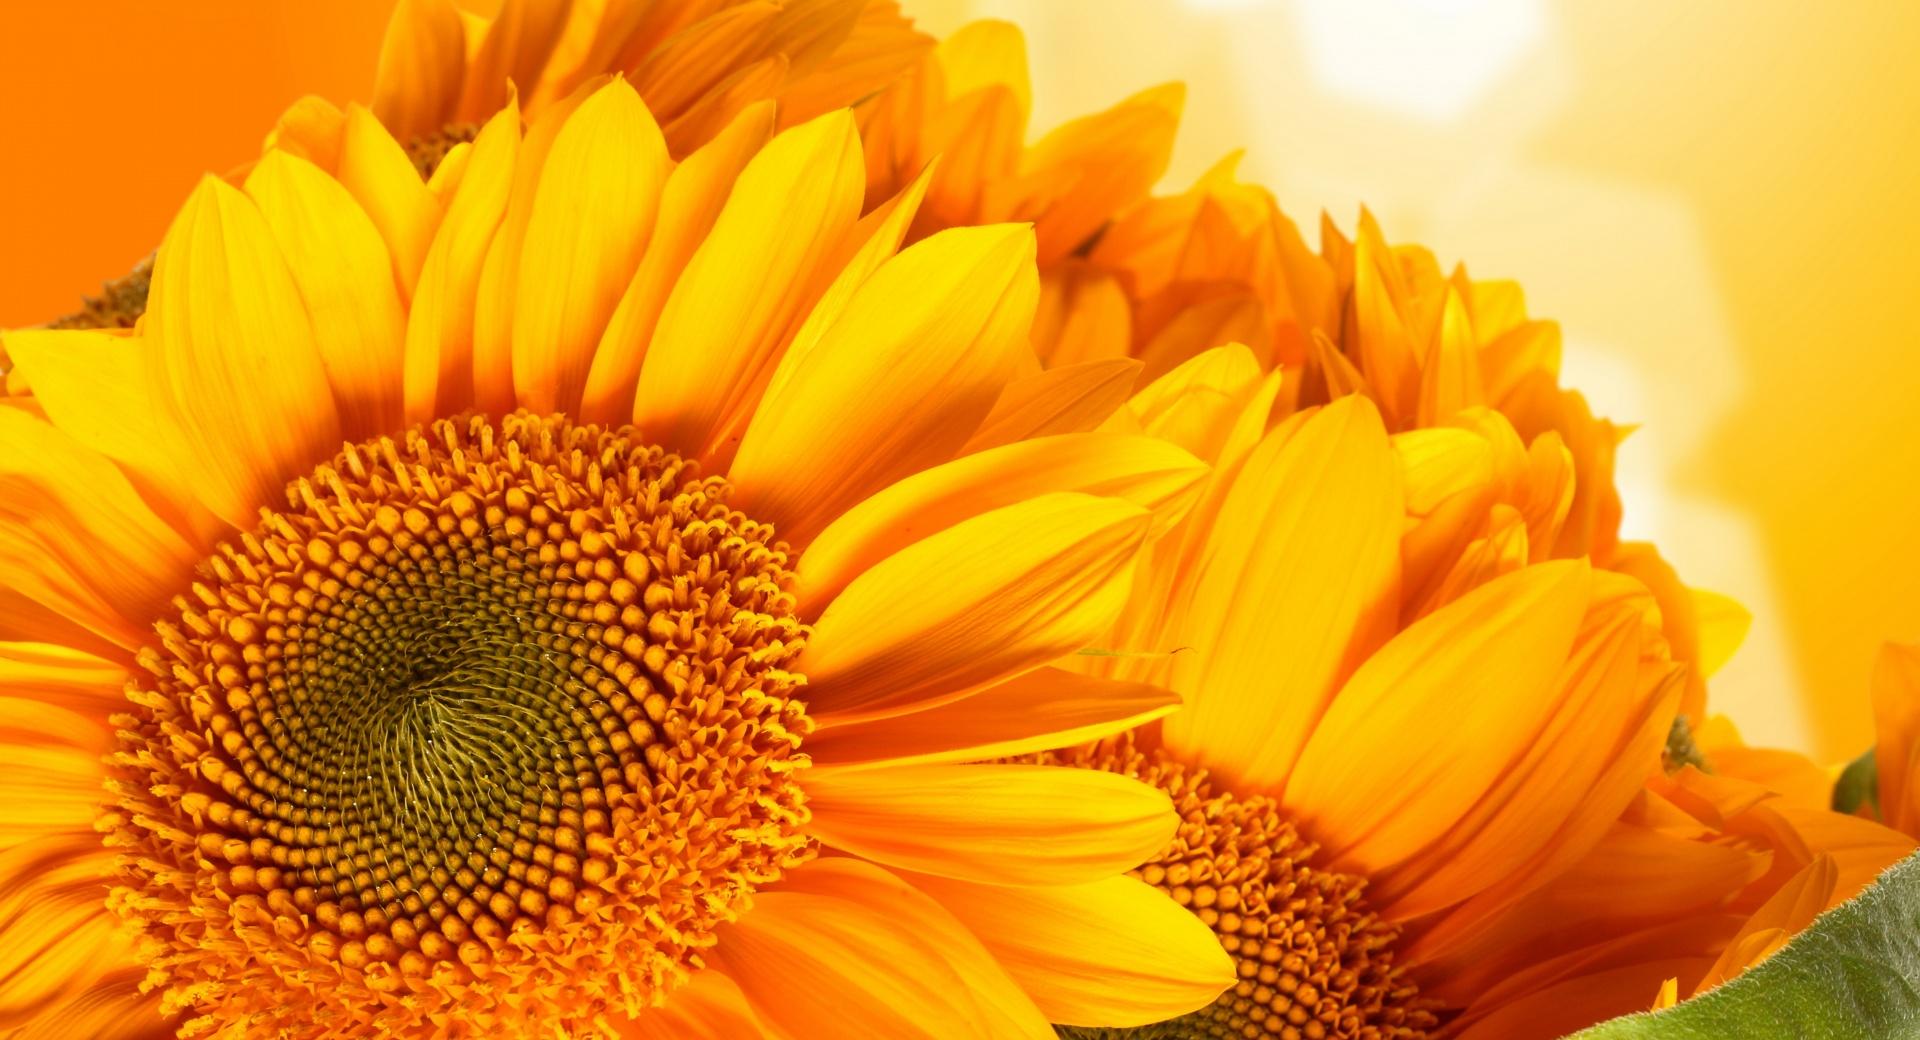 Golden Sunflowers wallpapers HD quality